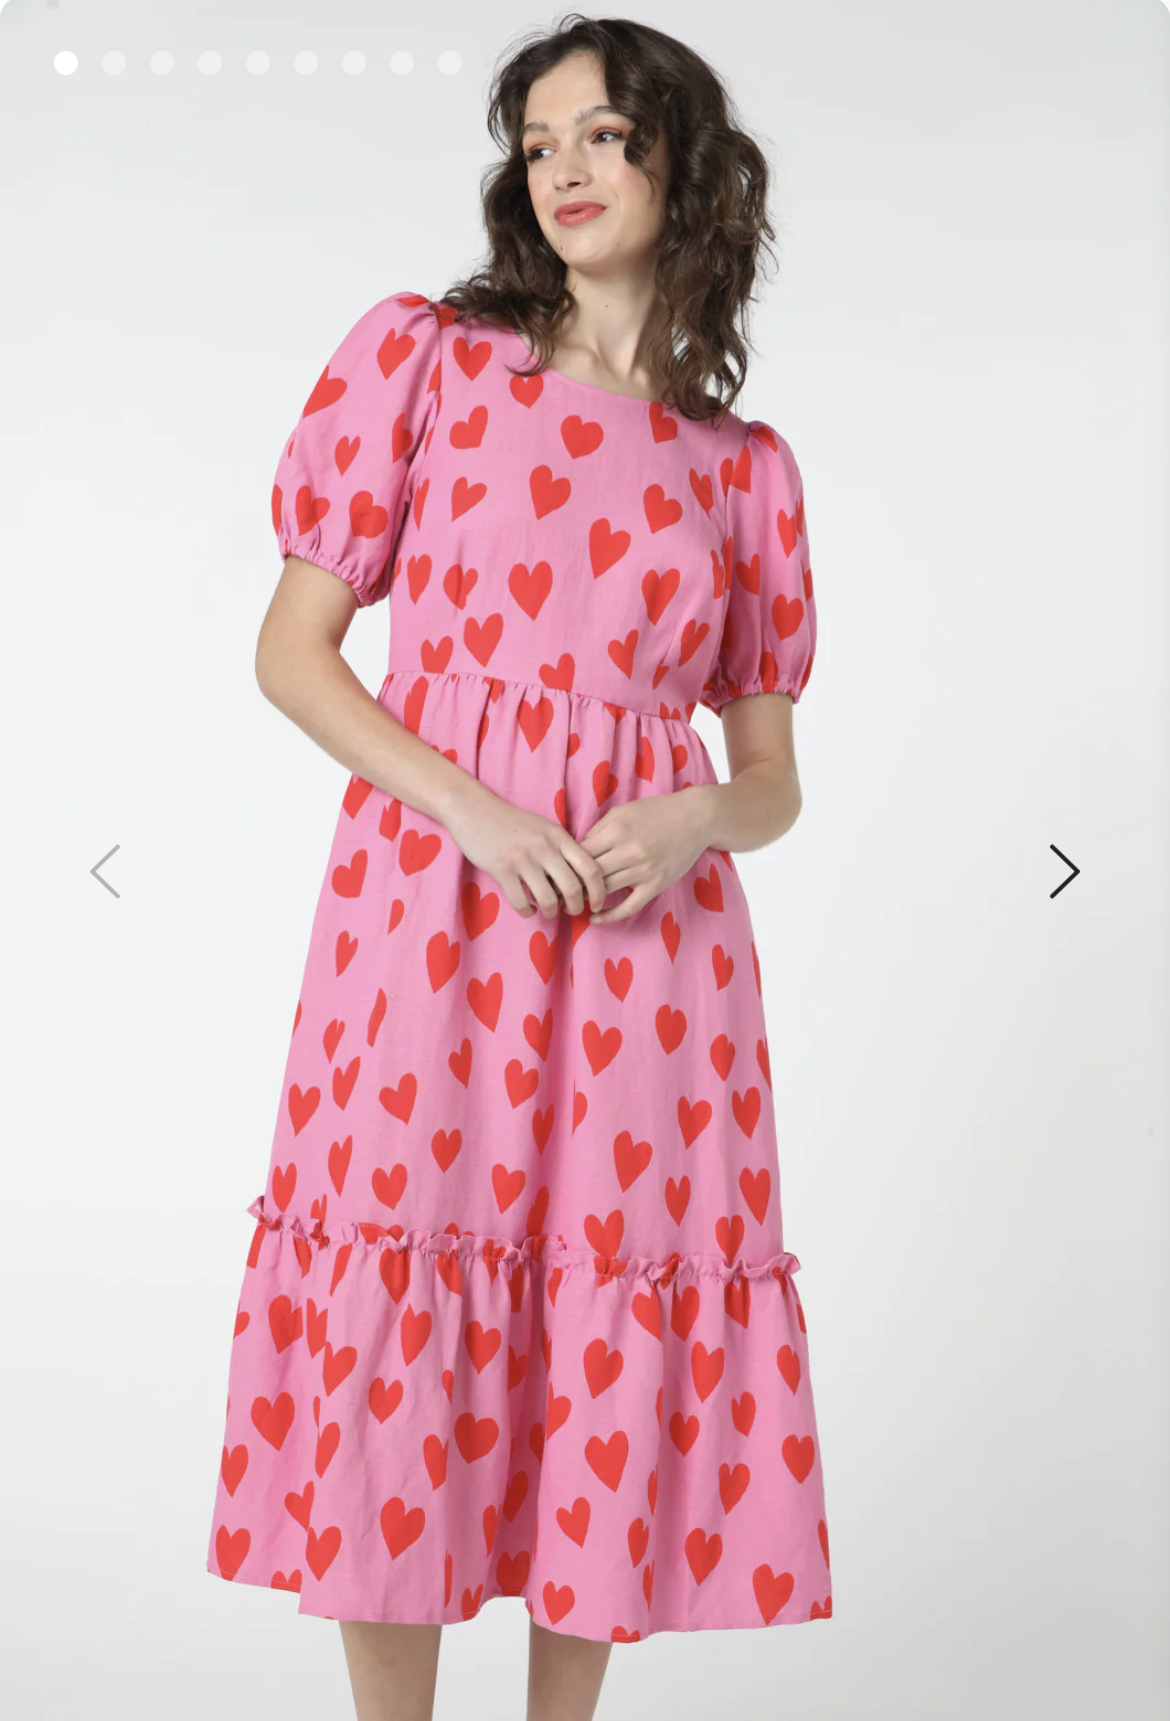 long pink dress with red hearts